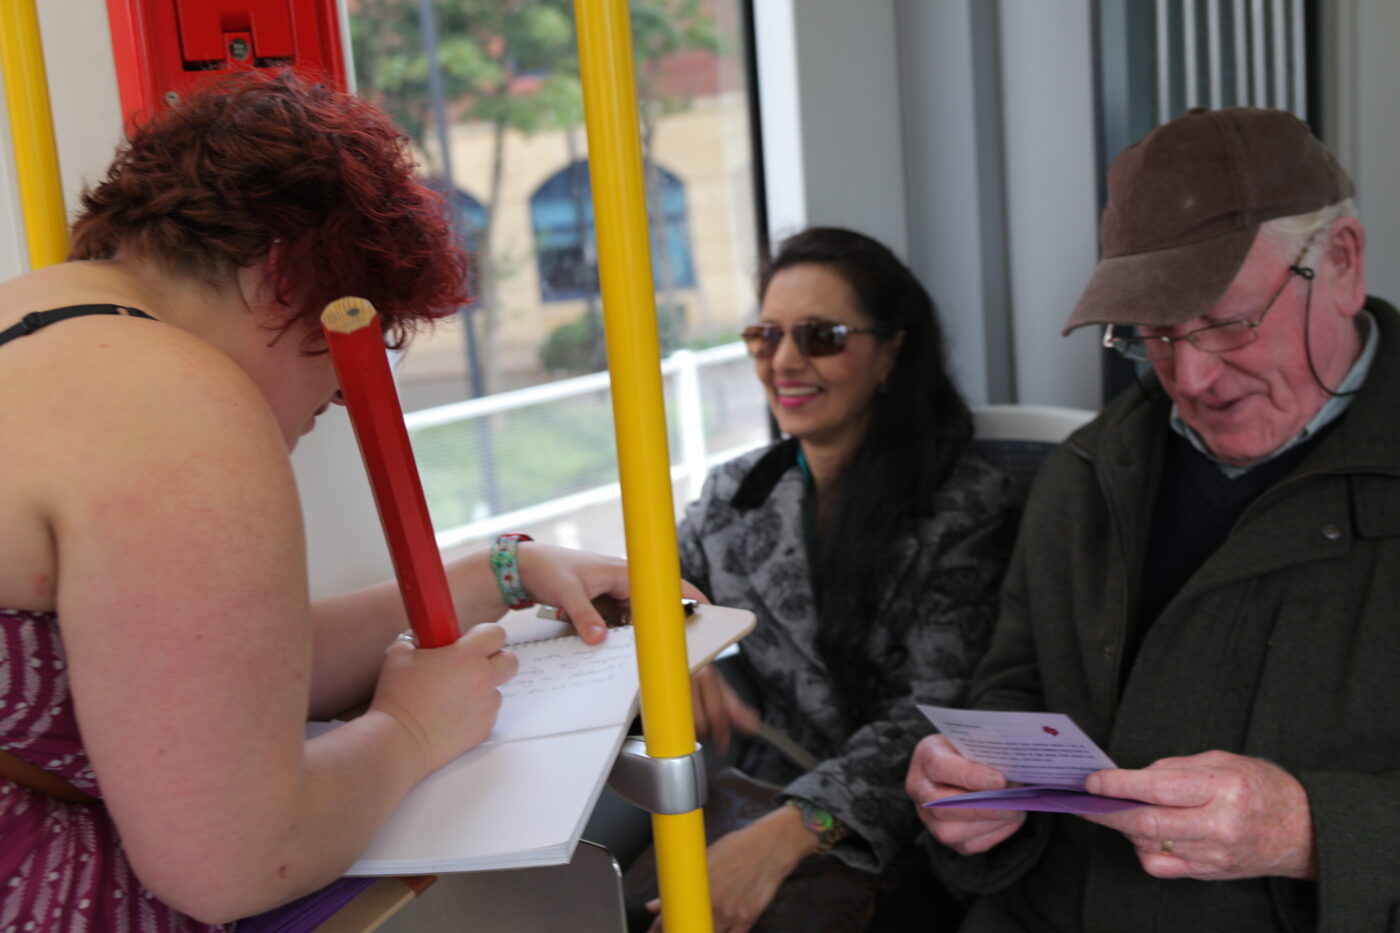 Sarah is on a tram using a giant pencil to a write in a notebook. Opposite her, two people are smiling.